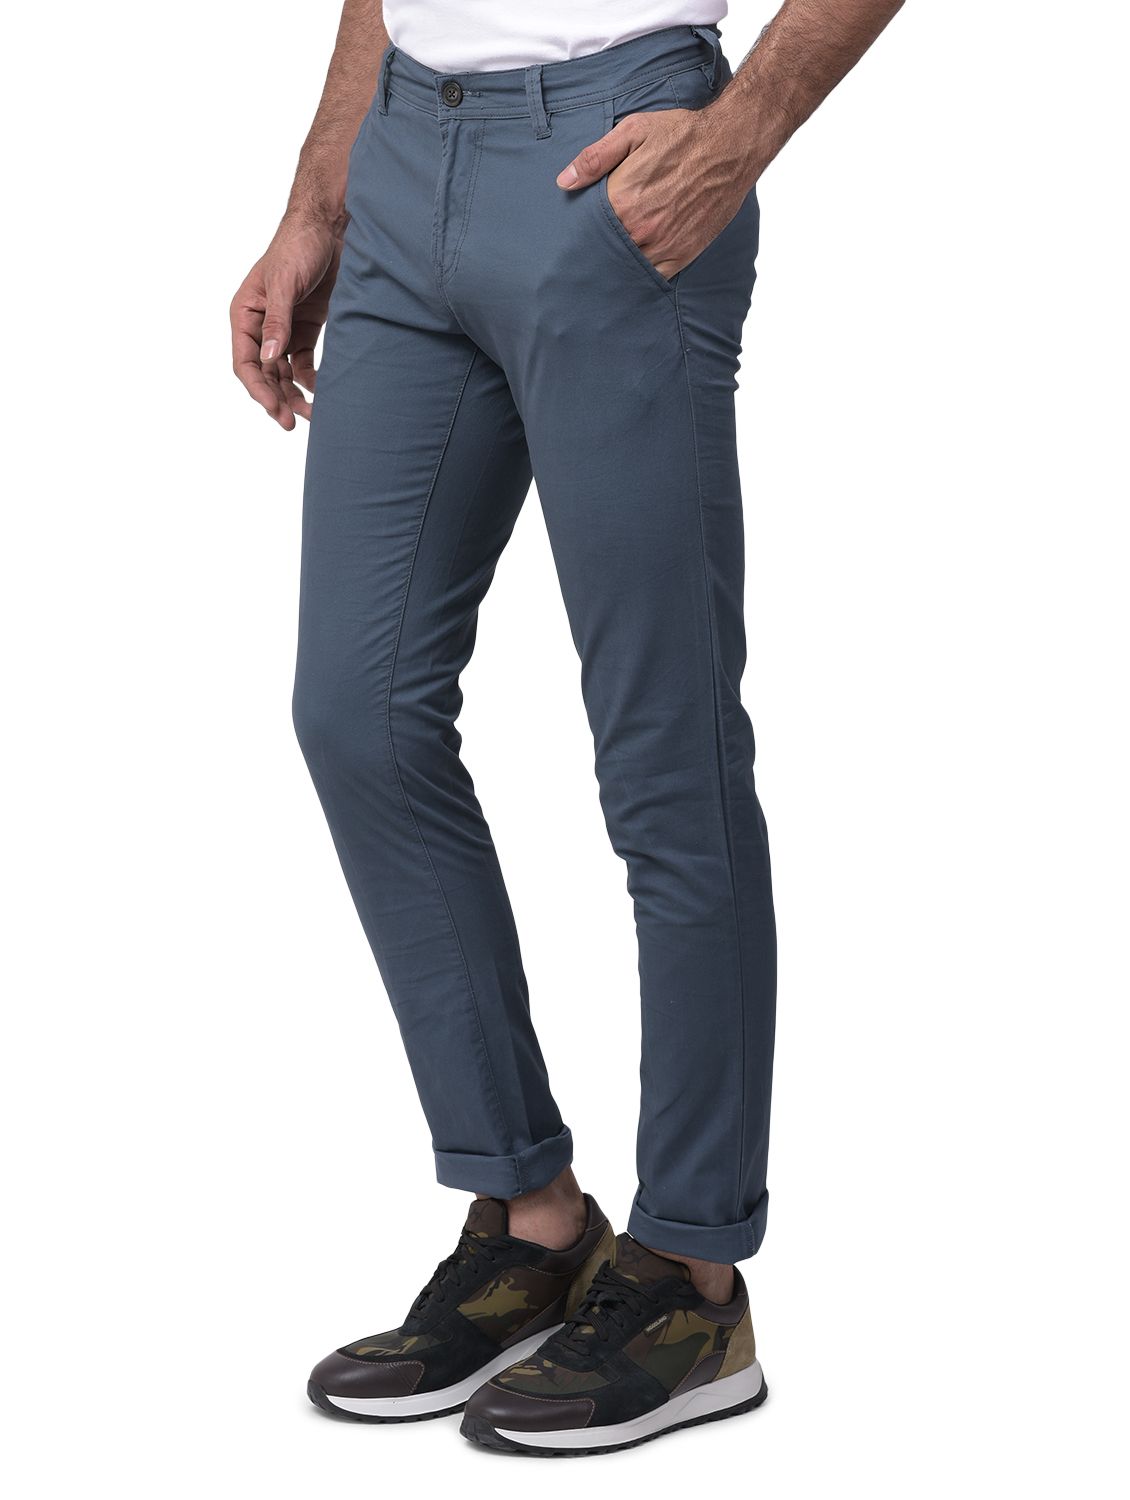 Indian teal chino trousers for men